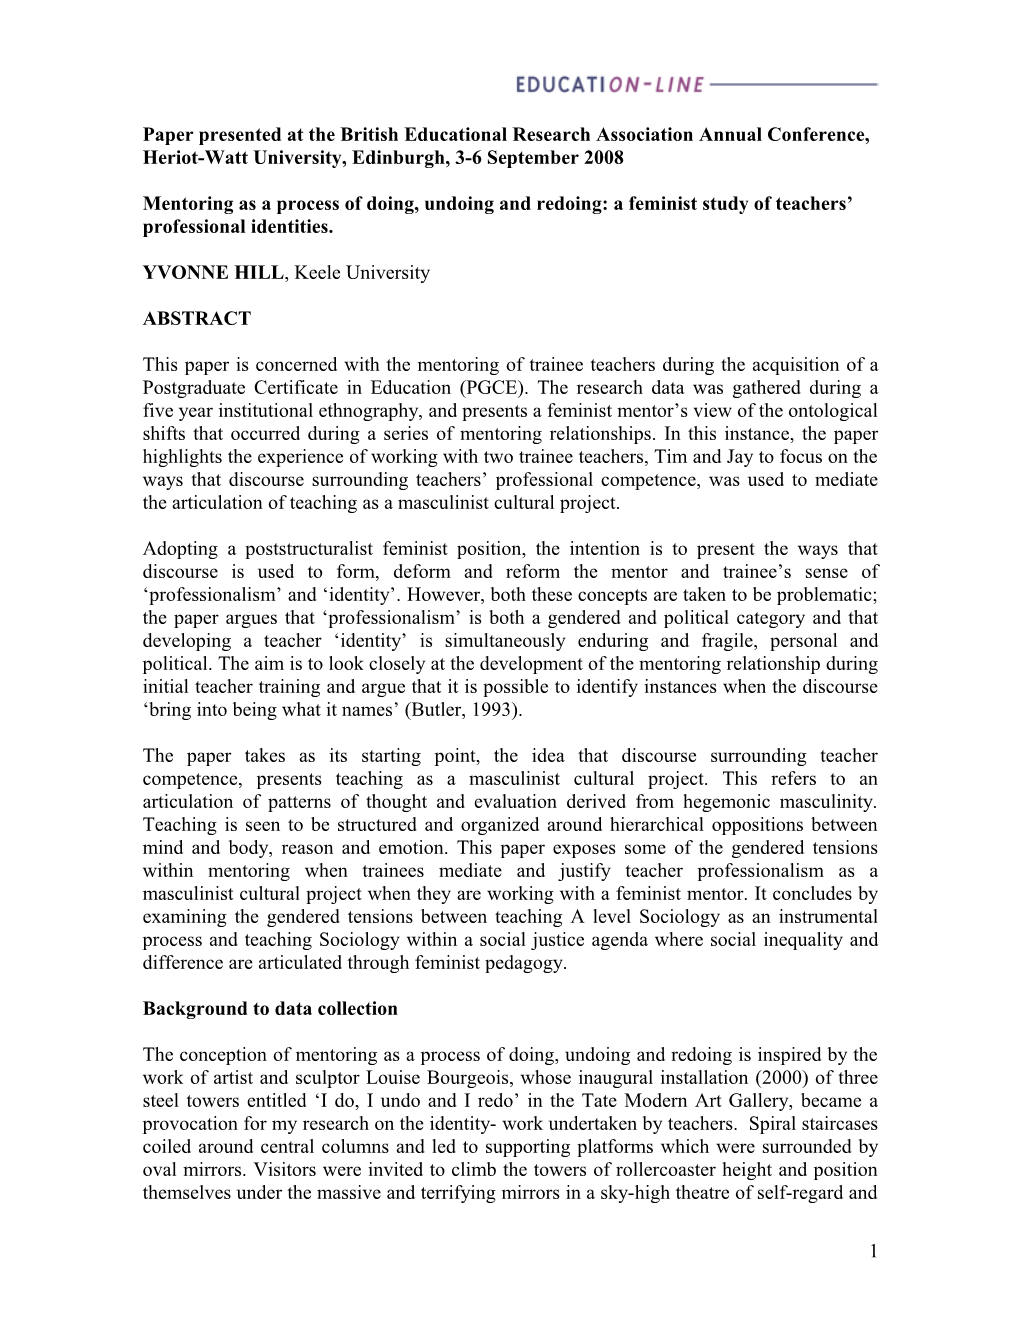 Mentoring As a Process of Doing, Undoing and Redoing: a Feminist Study of Teachers Professional